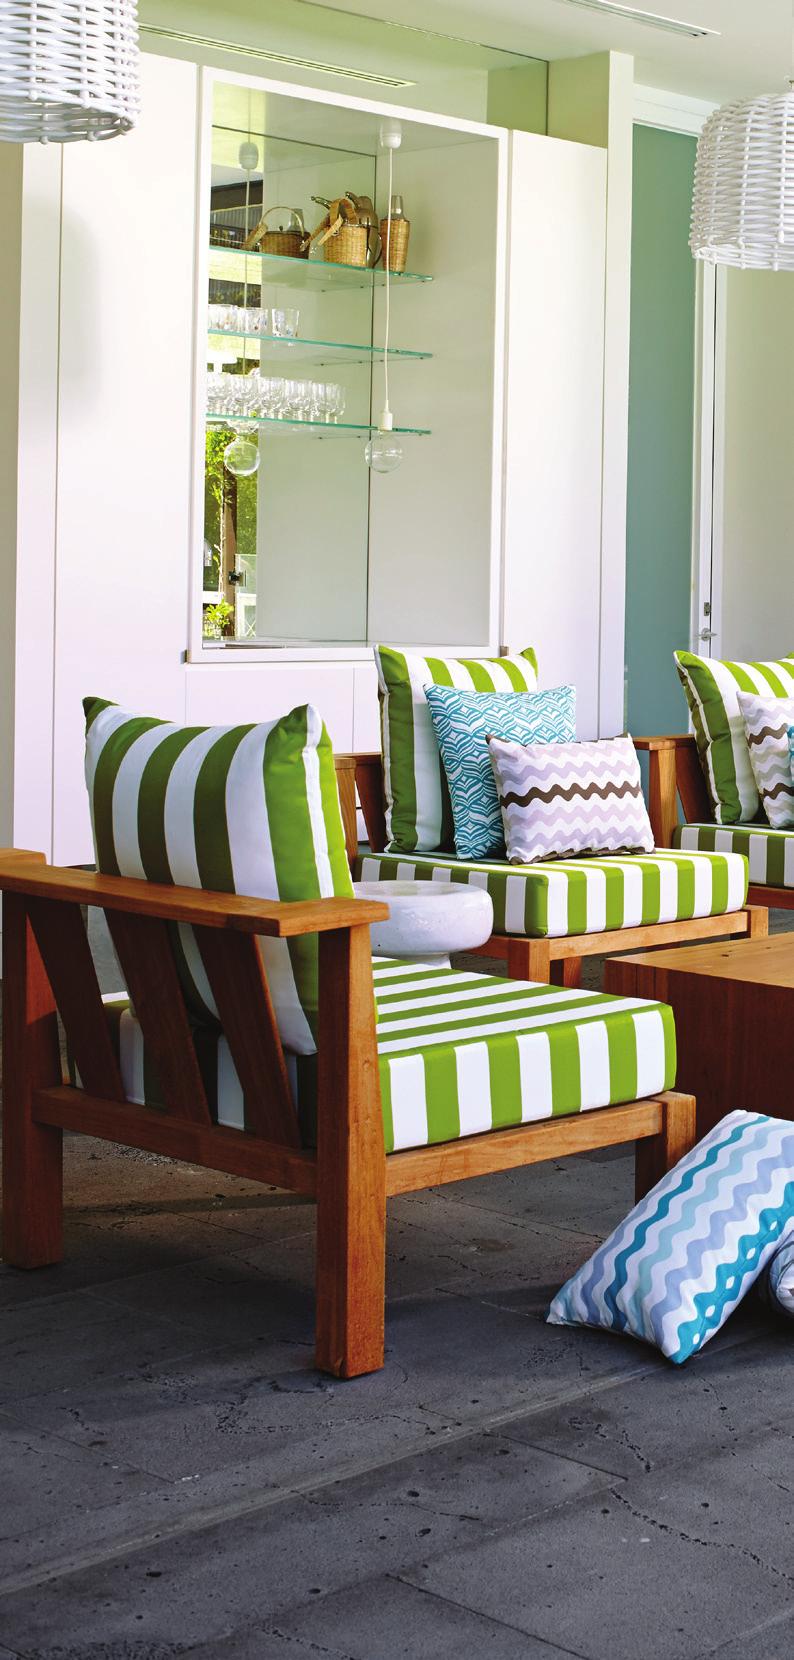 Chairs: Mallacoota Lime Scatter cushions Left-Right: Avoca Turquoise, Merimbula